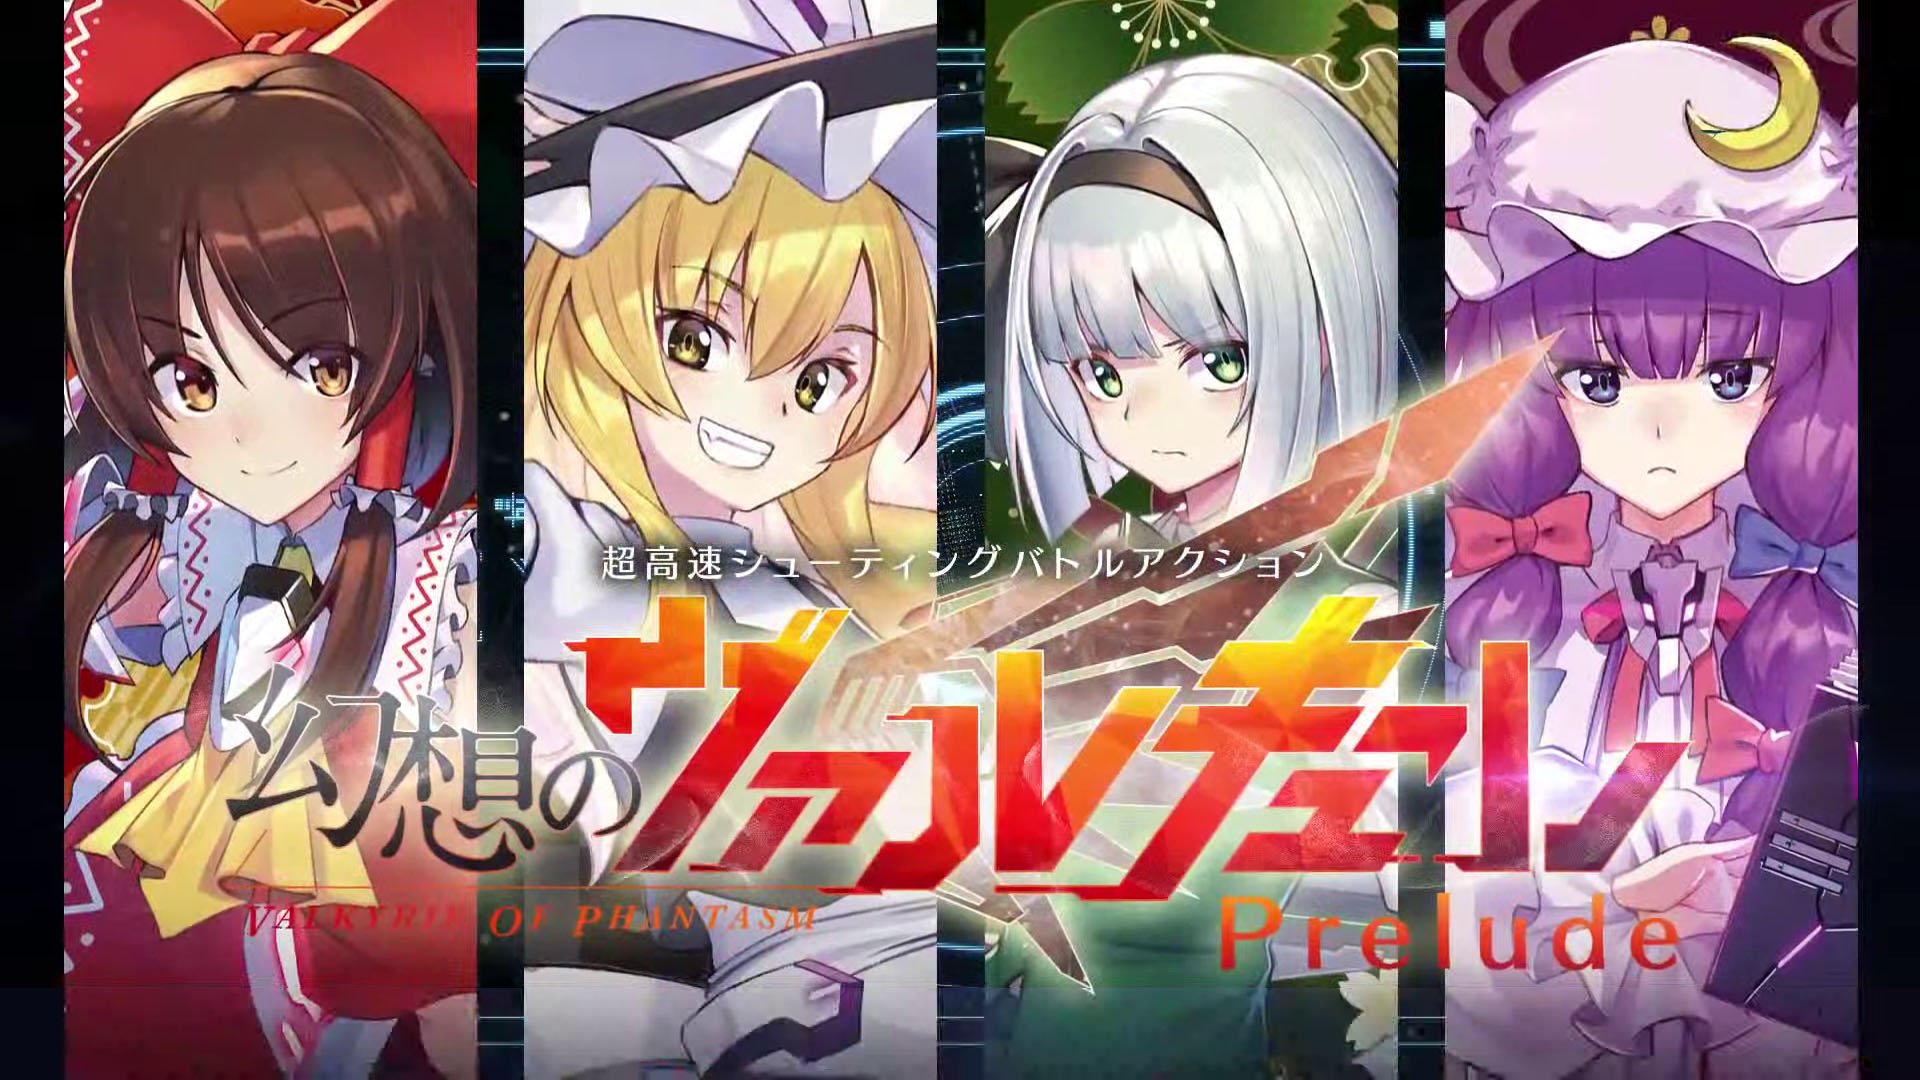 #
      Valkyrie of Phantasm Prelude for PC launches May 8 at Reitaisai 19